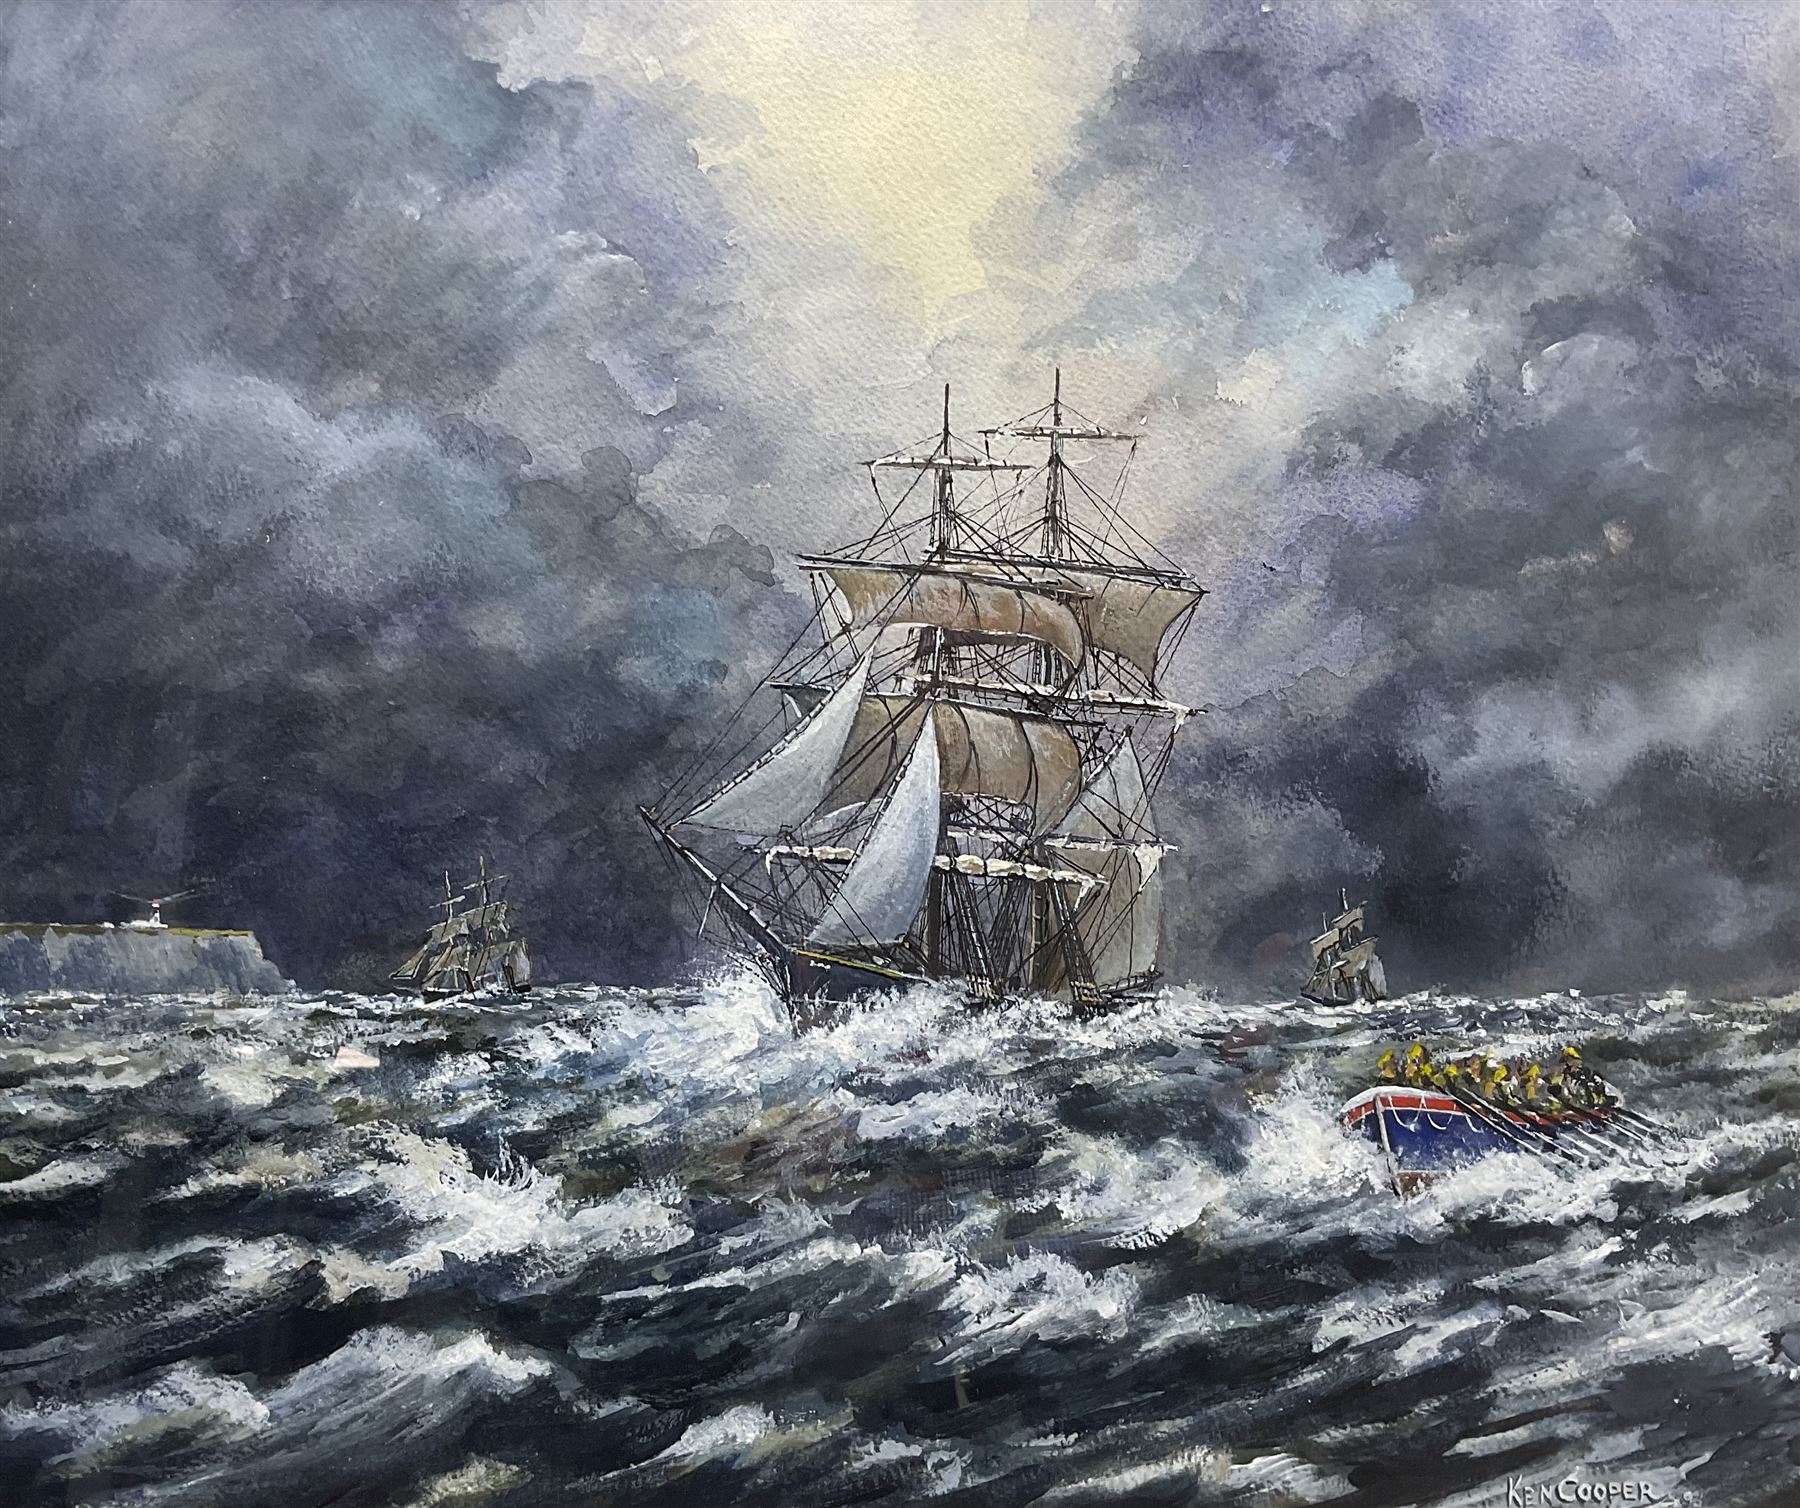 Ken Cooper (British 20th century): The Brig 'Delta' lost off Bridlington in the Great Gale of 1871